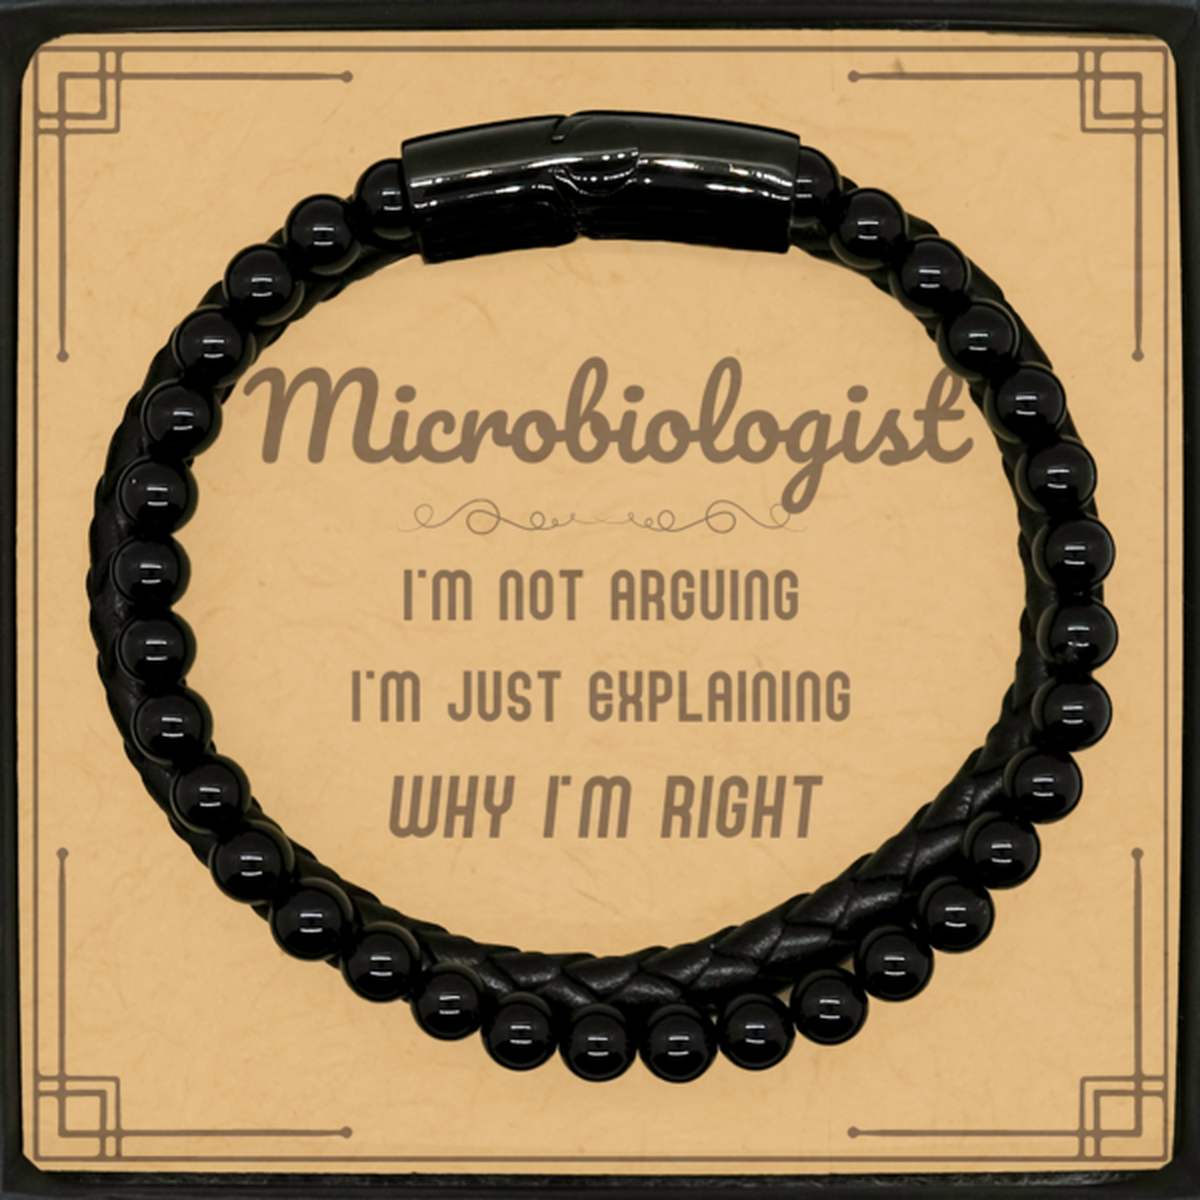 Microbiologist I'm not Arguing. I'm Just Explaining Why I'm RIGHT Stone Leather Bracelets, Funny Saying Quote Microbiologist Gifts For Microbiologist Message Card Graduation Birthday Christmas Gifts for Men Women Coworker